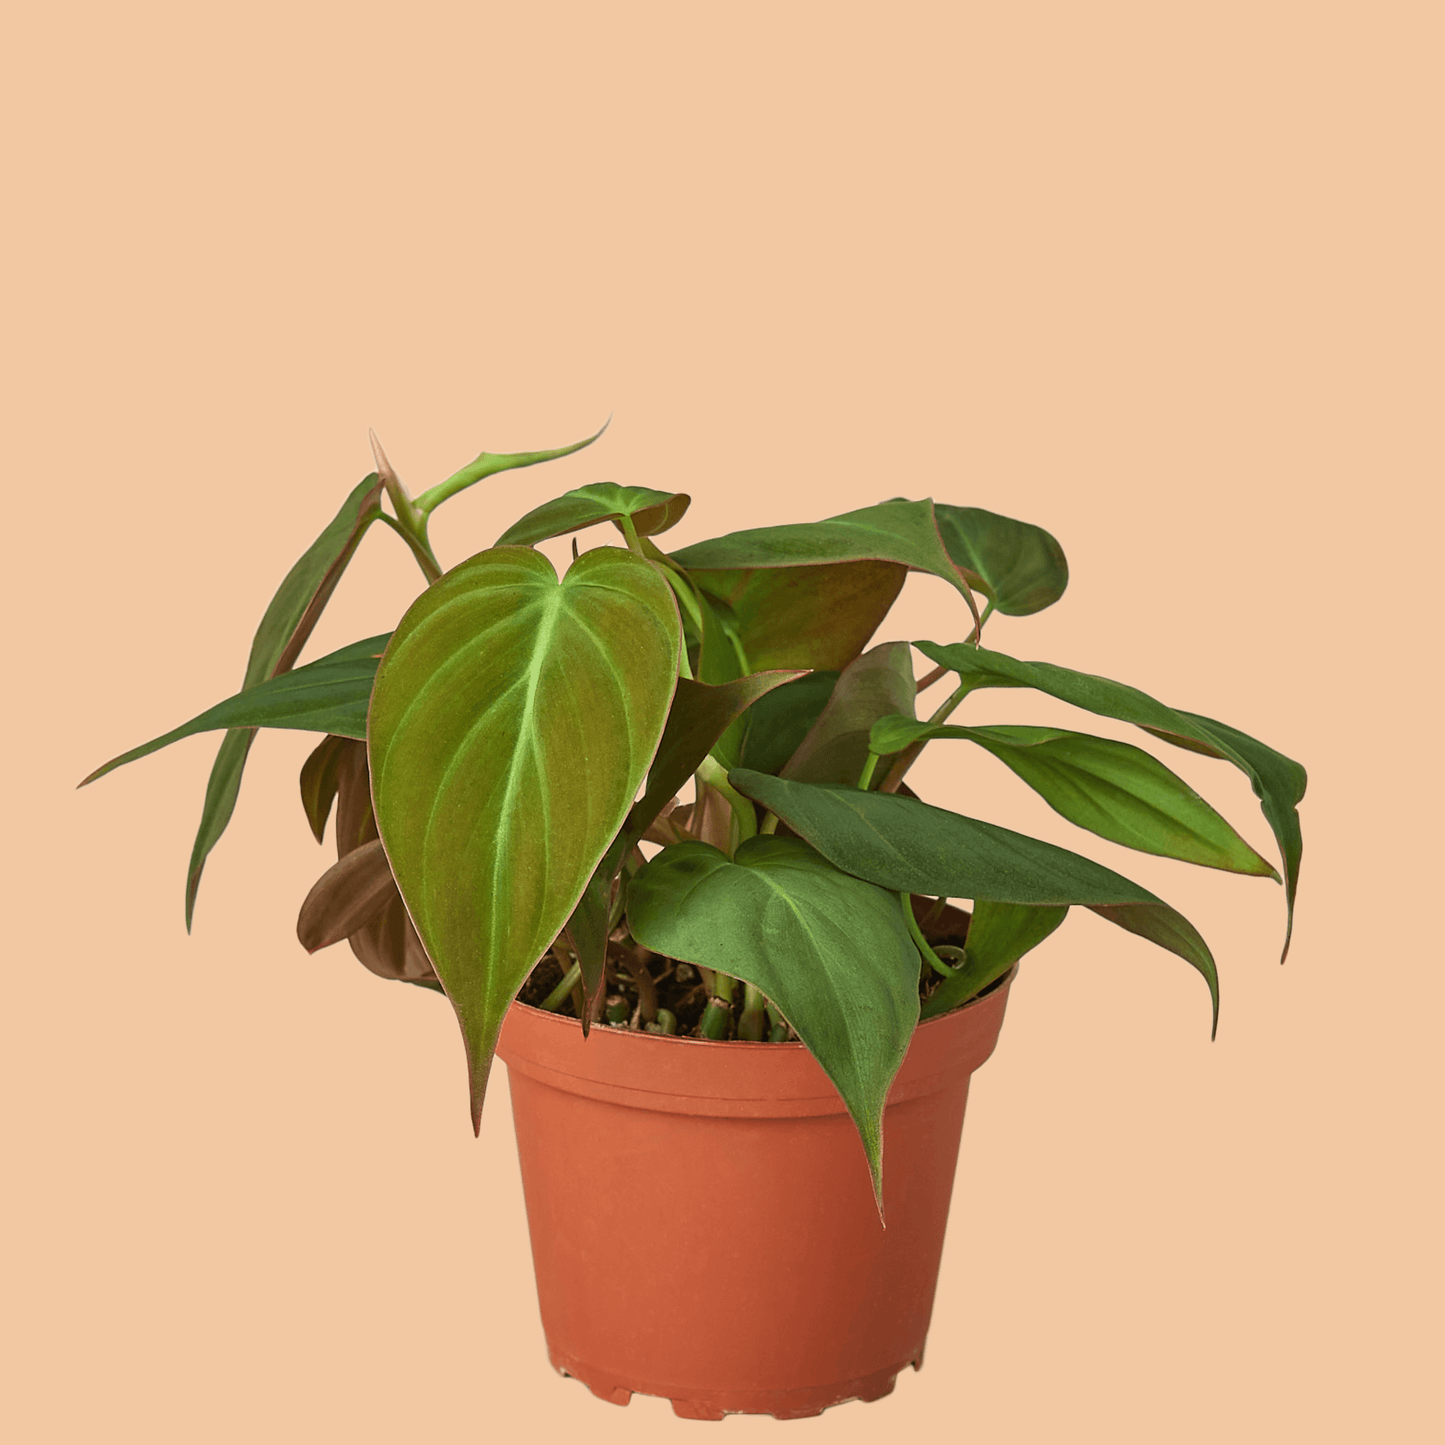 Philodendron 'Velvet' "Micans" - The Leafy Branch